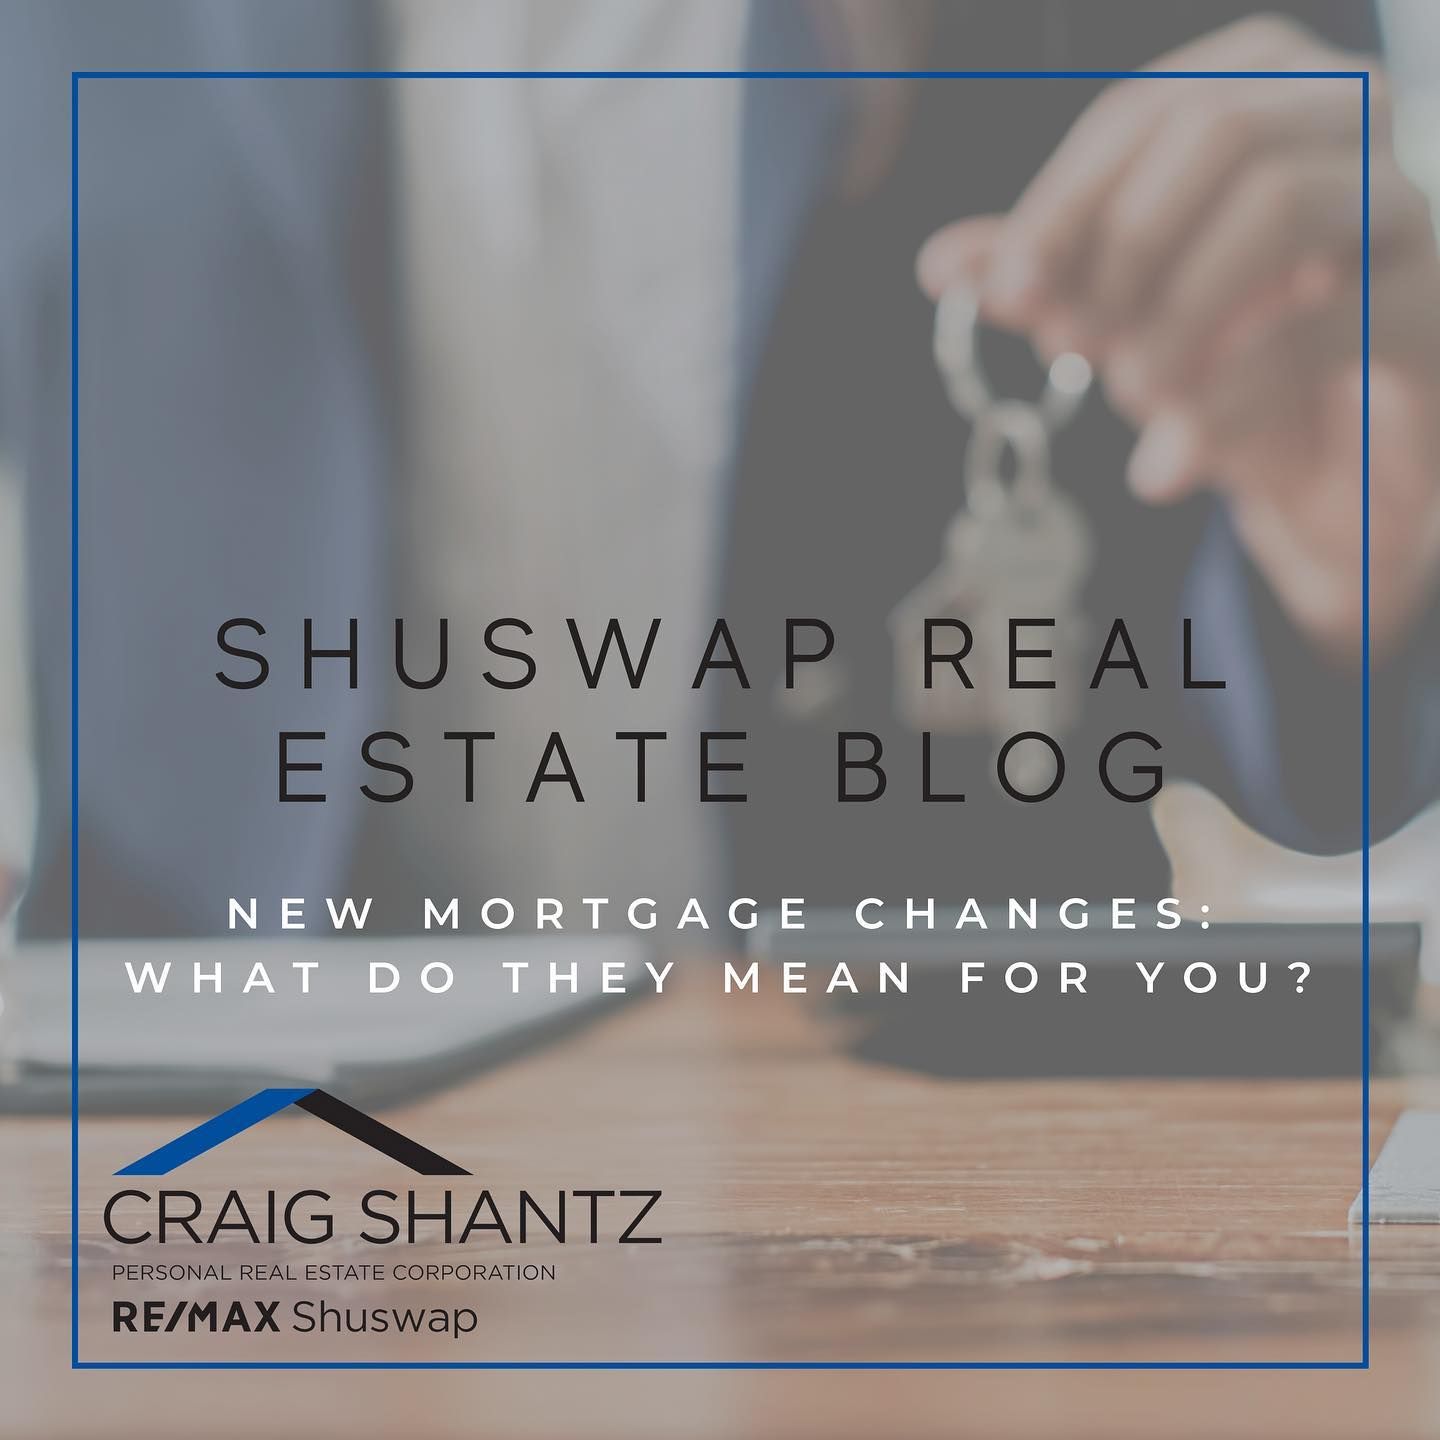 New Mortgage Changes: What Do They Mean for You?